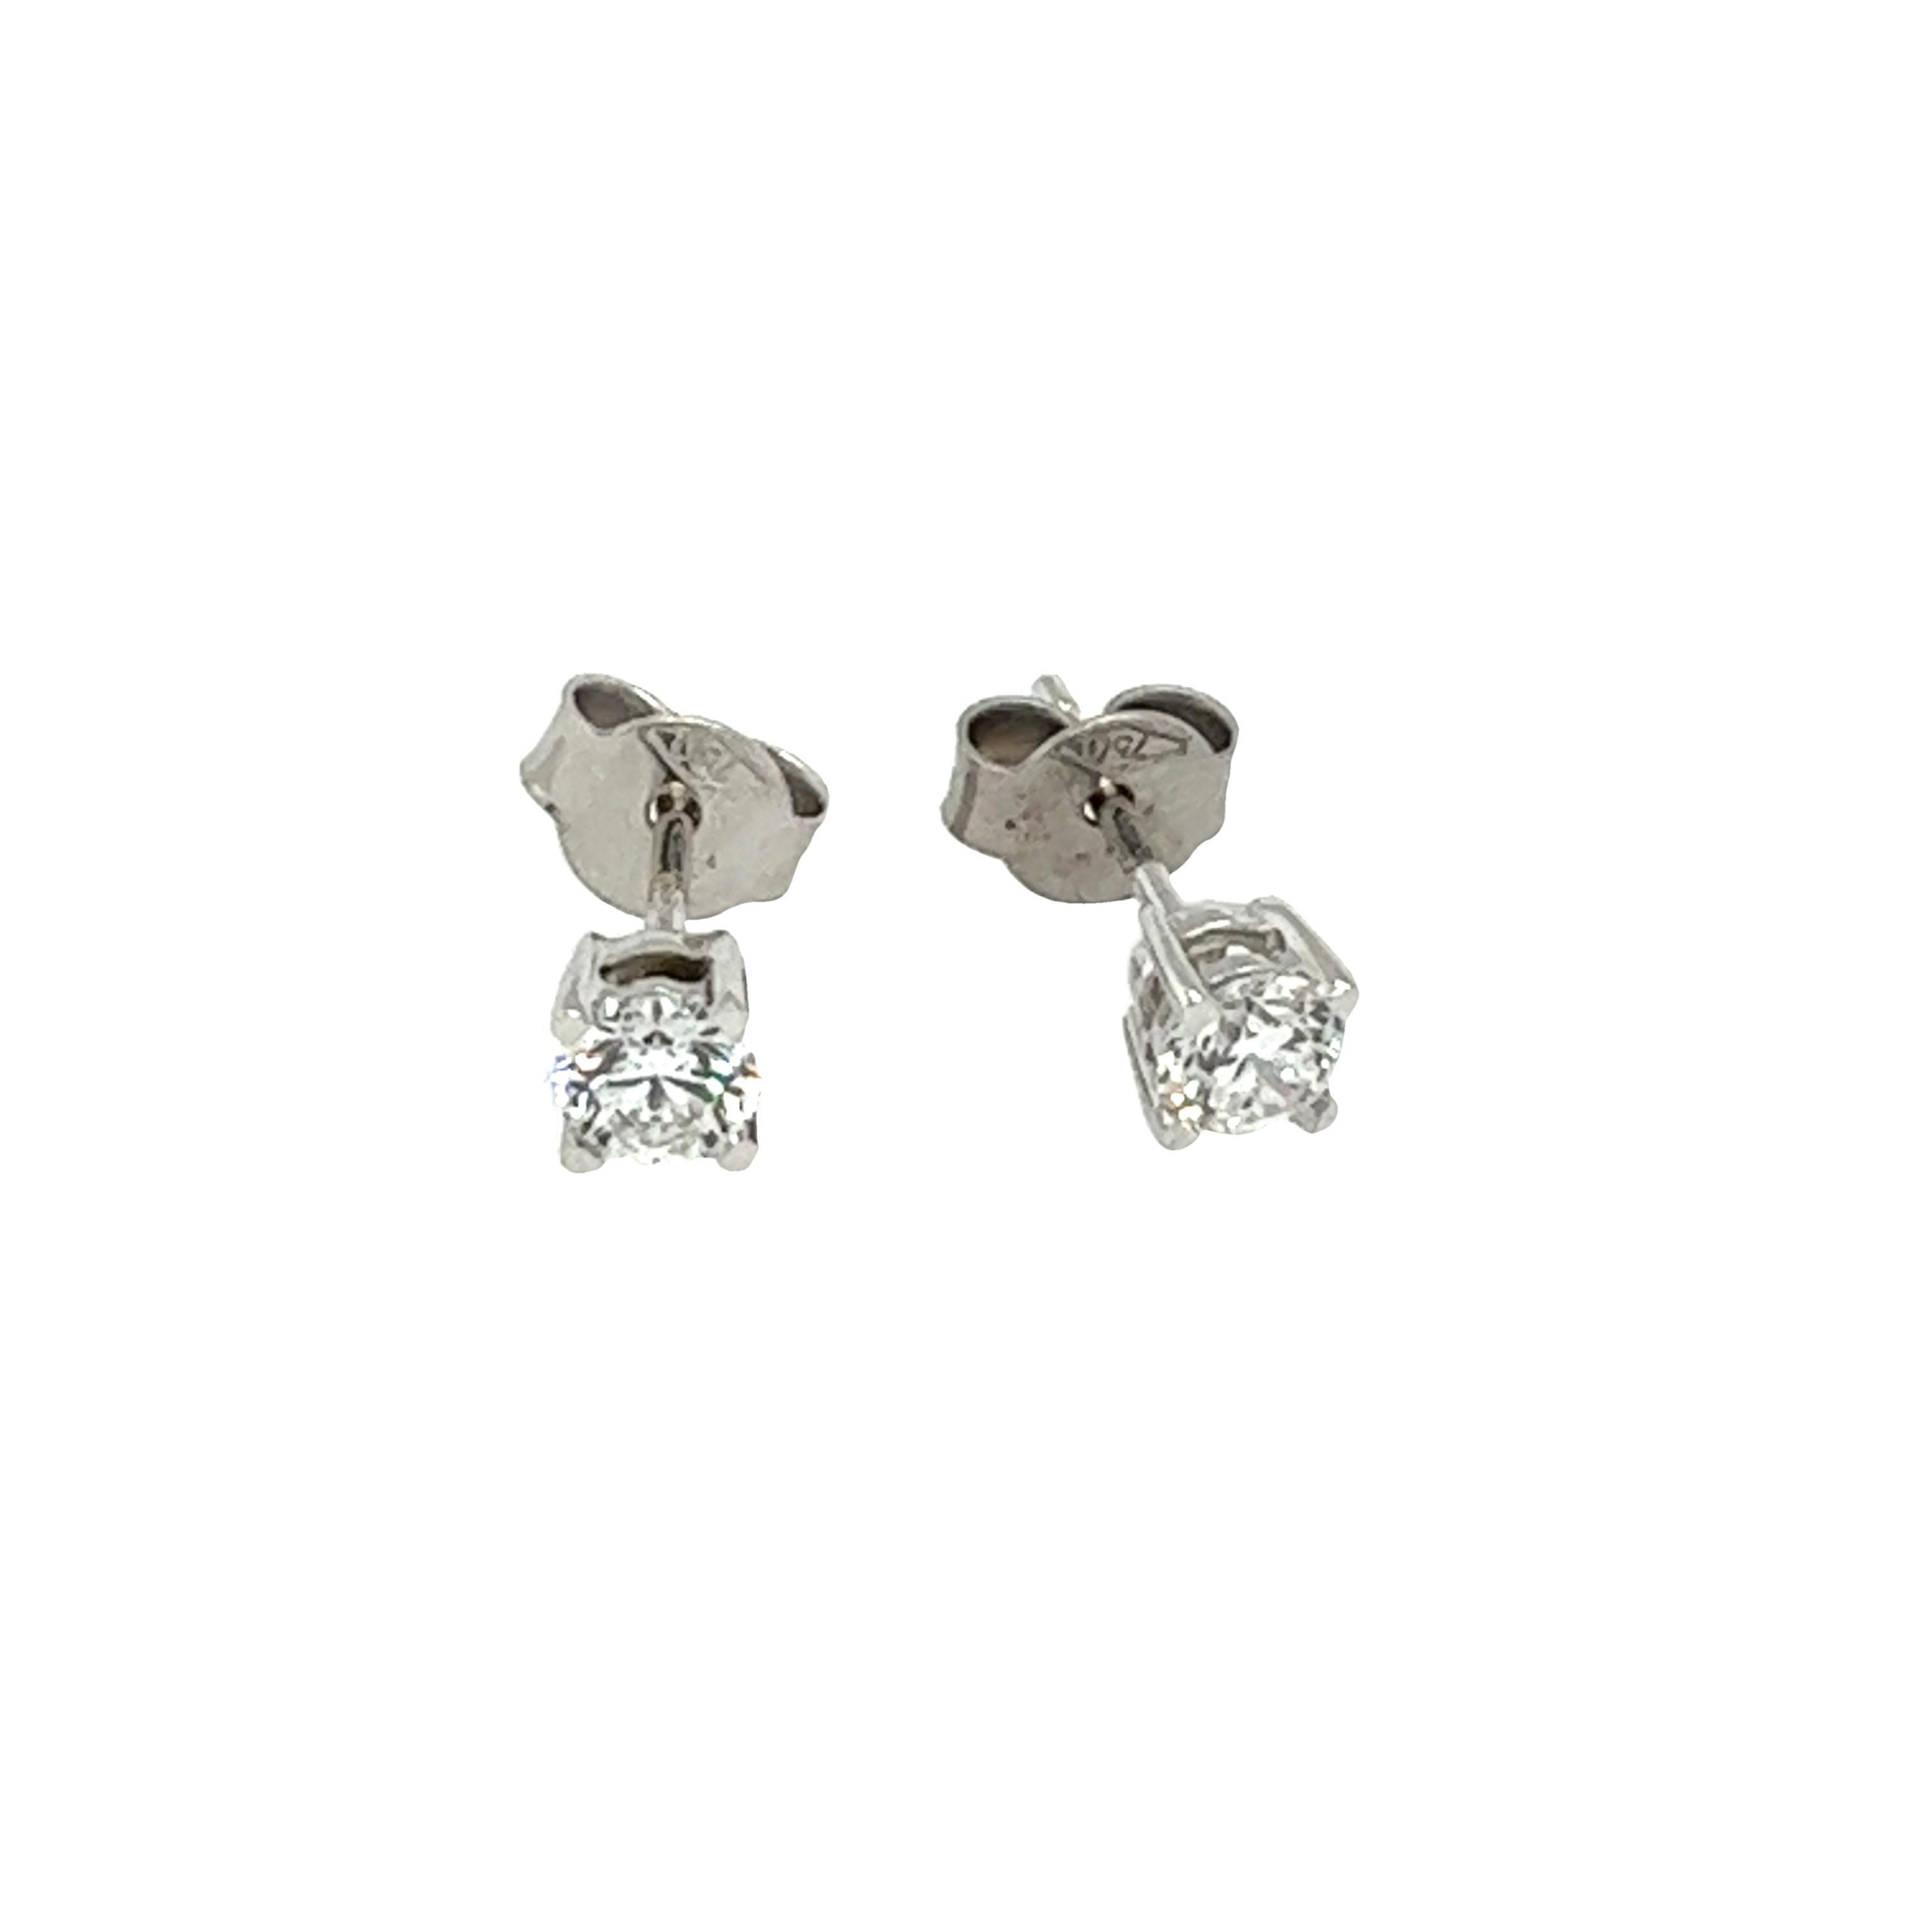 These stunning diamond earrings are the perfect pair to add to your collection. 
They are set in 18ct white gold. The pair is set with 2 round brilliant cut diamonds, 
Total Diamond Weight: 0.60ct 
Diamond Colour: D
Diamond Clarity: VSI1
Total 